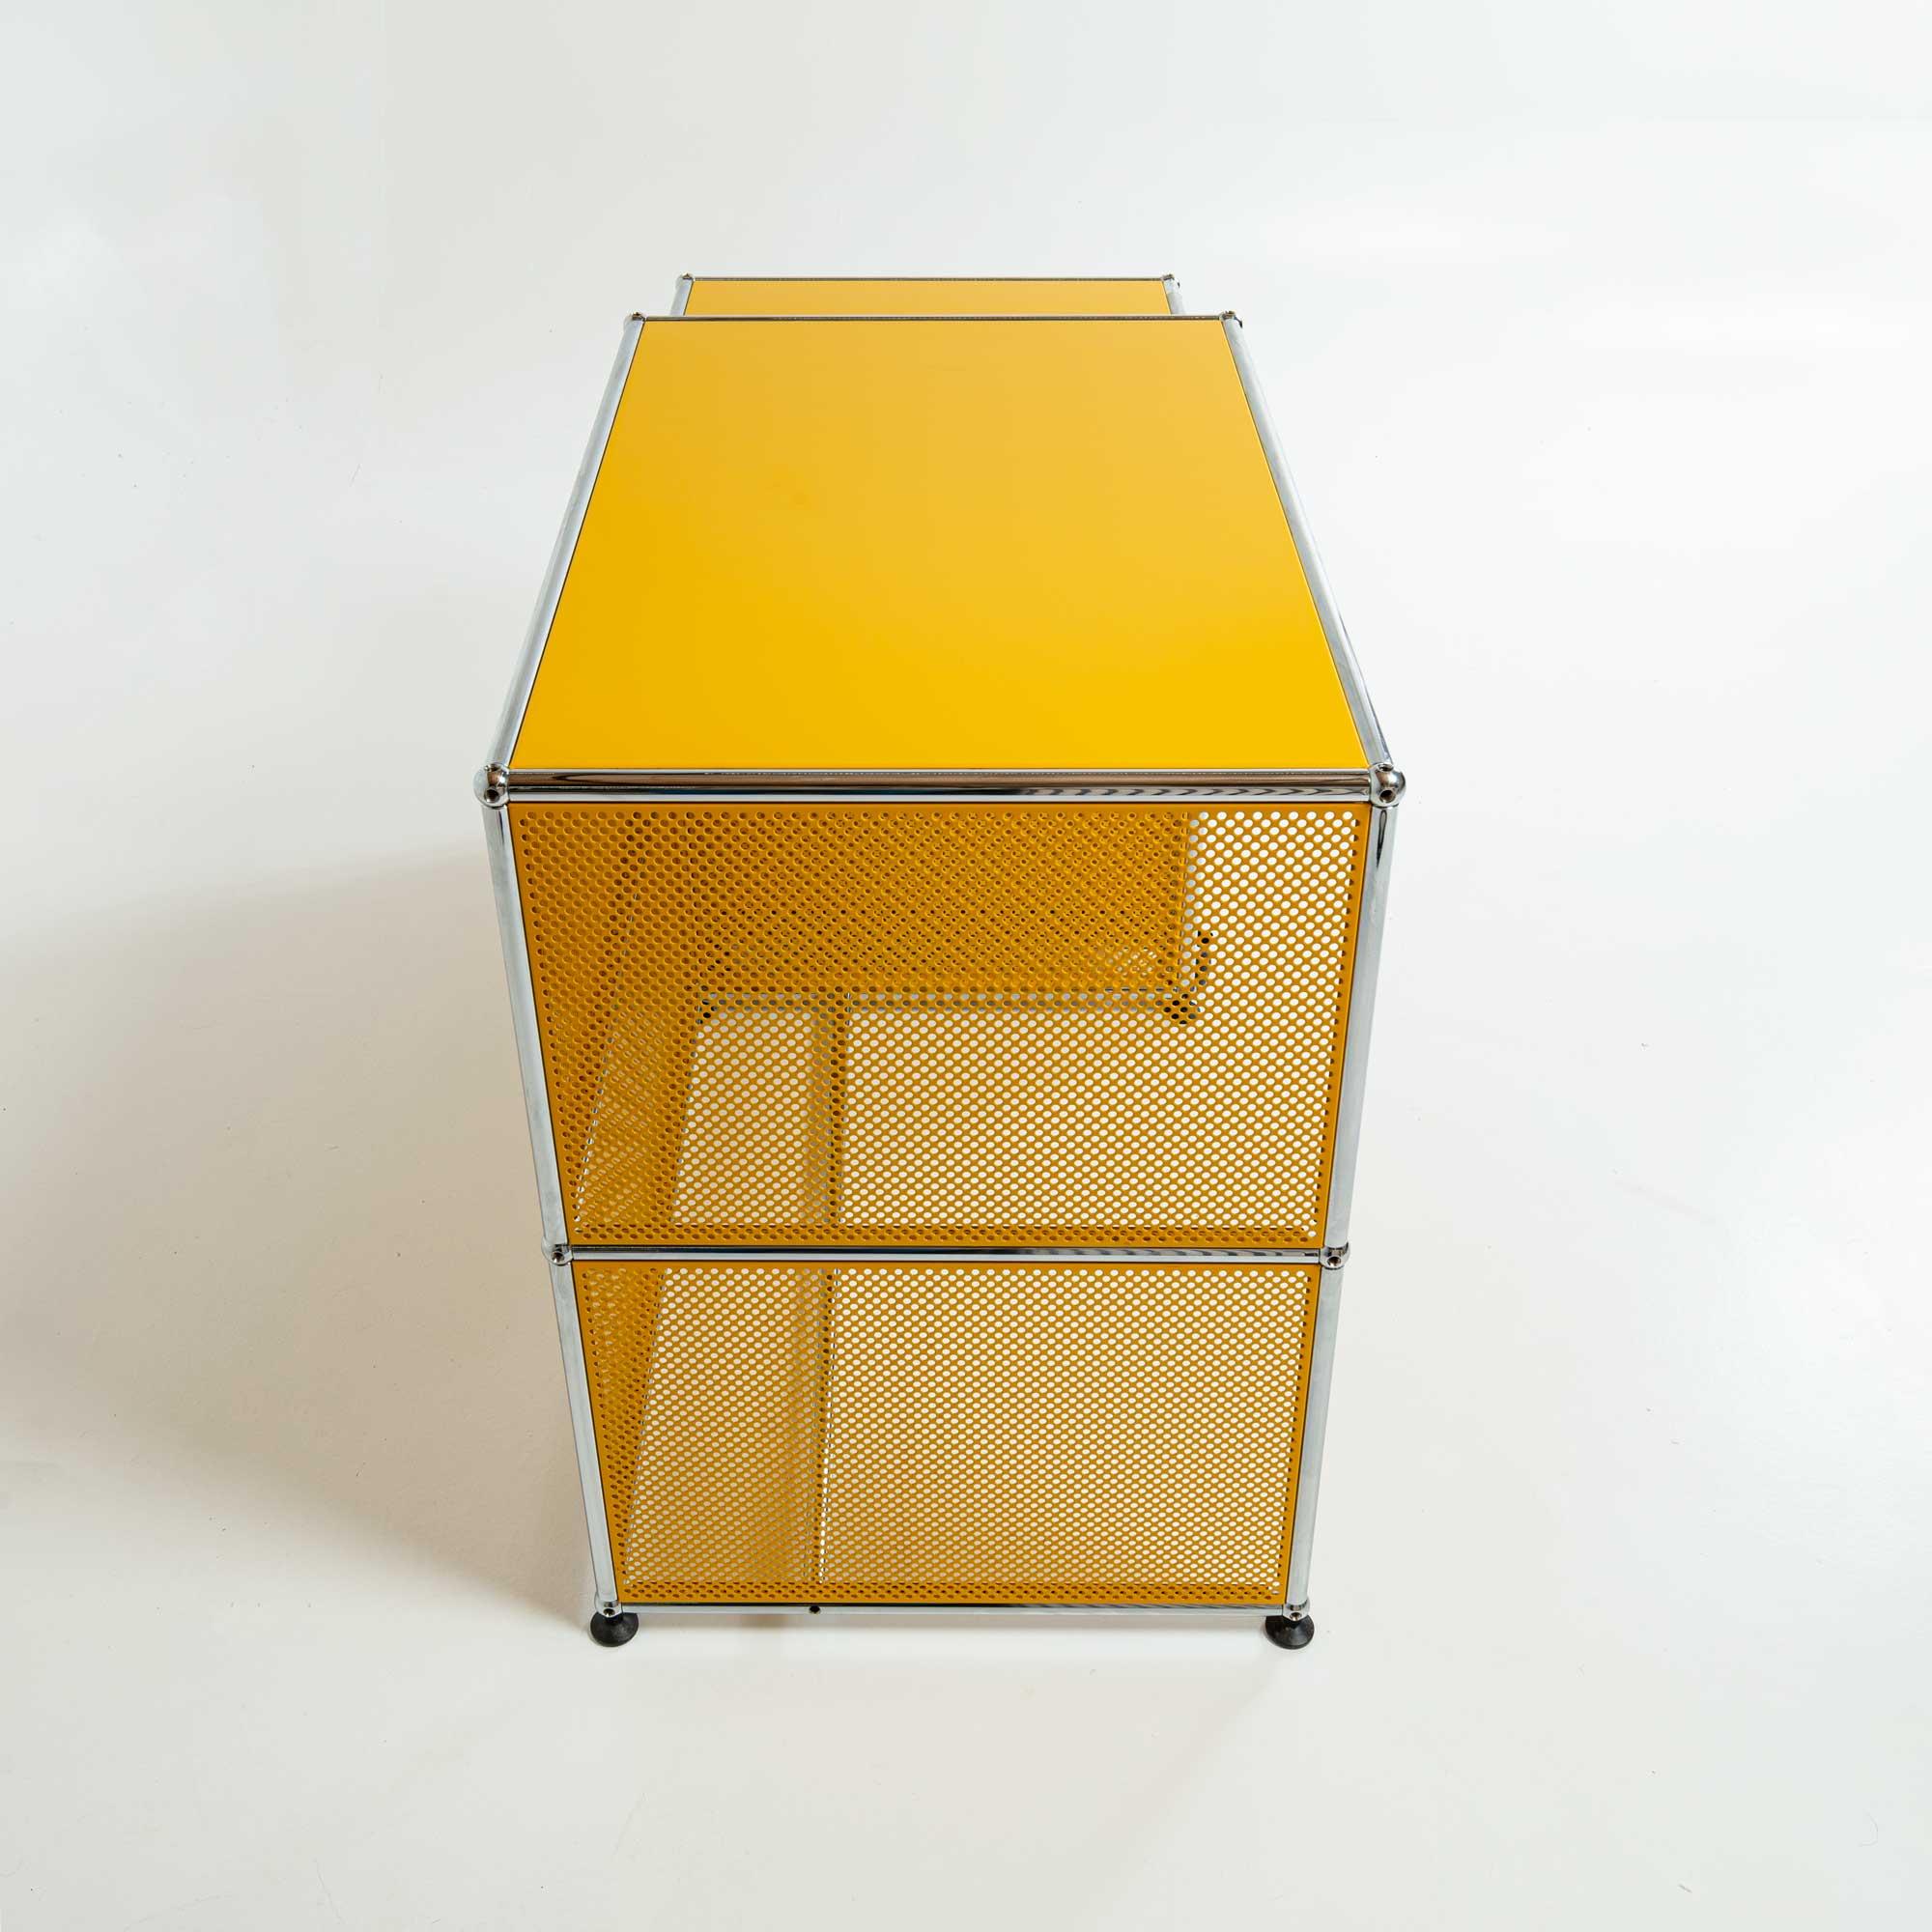 Swiss USM Modular System Desk and Rolling Cabinet in Golden Yellow